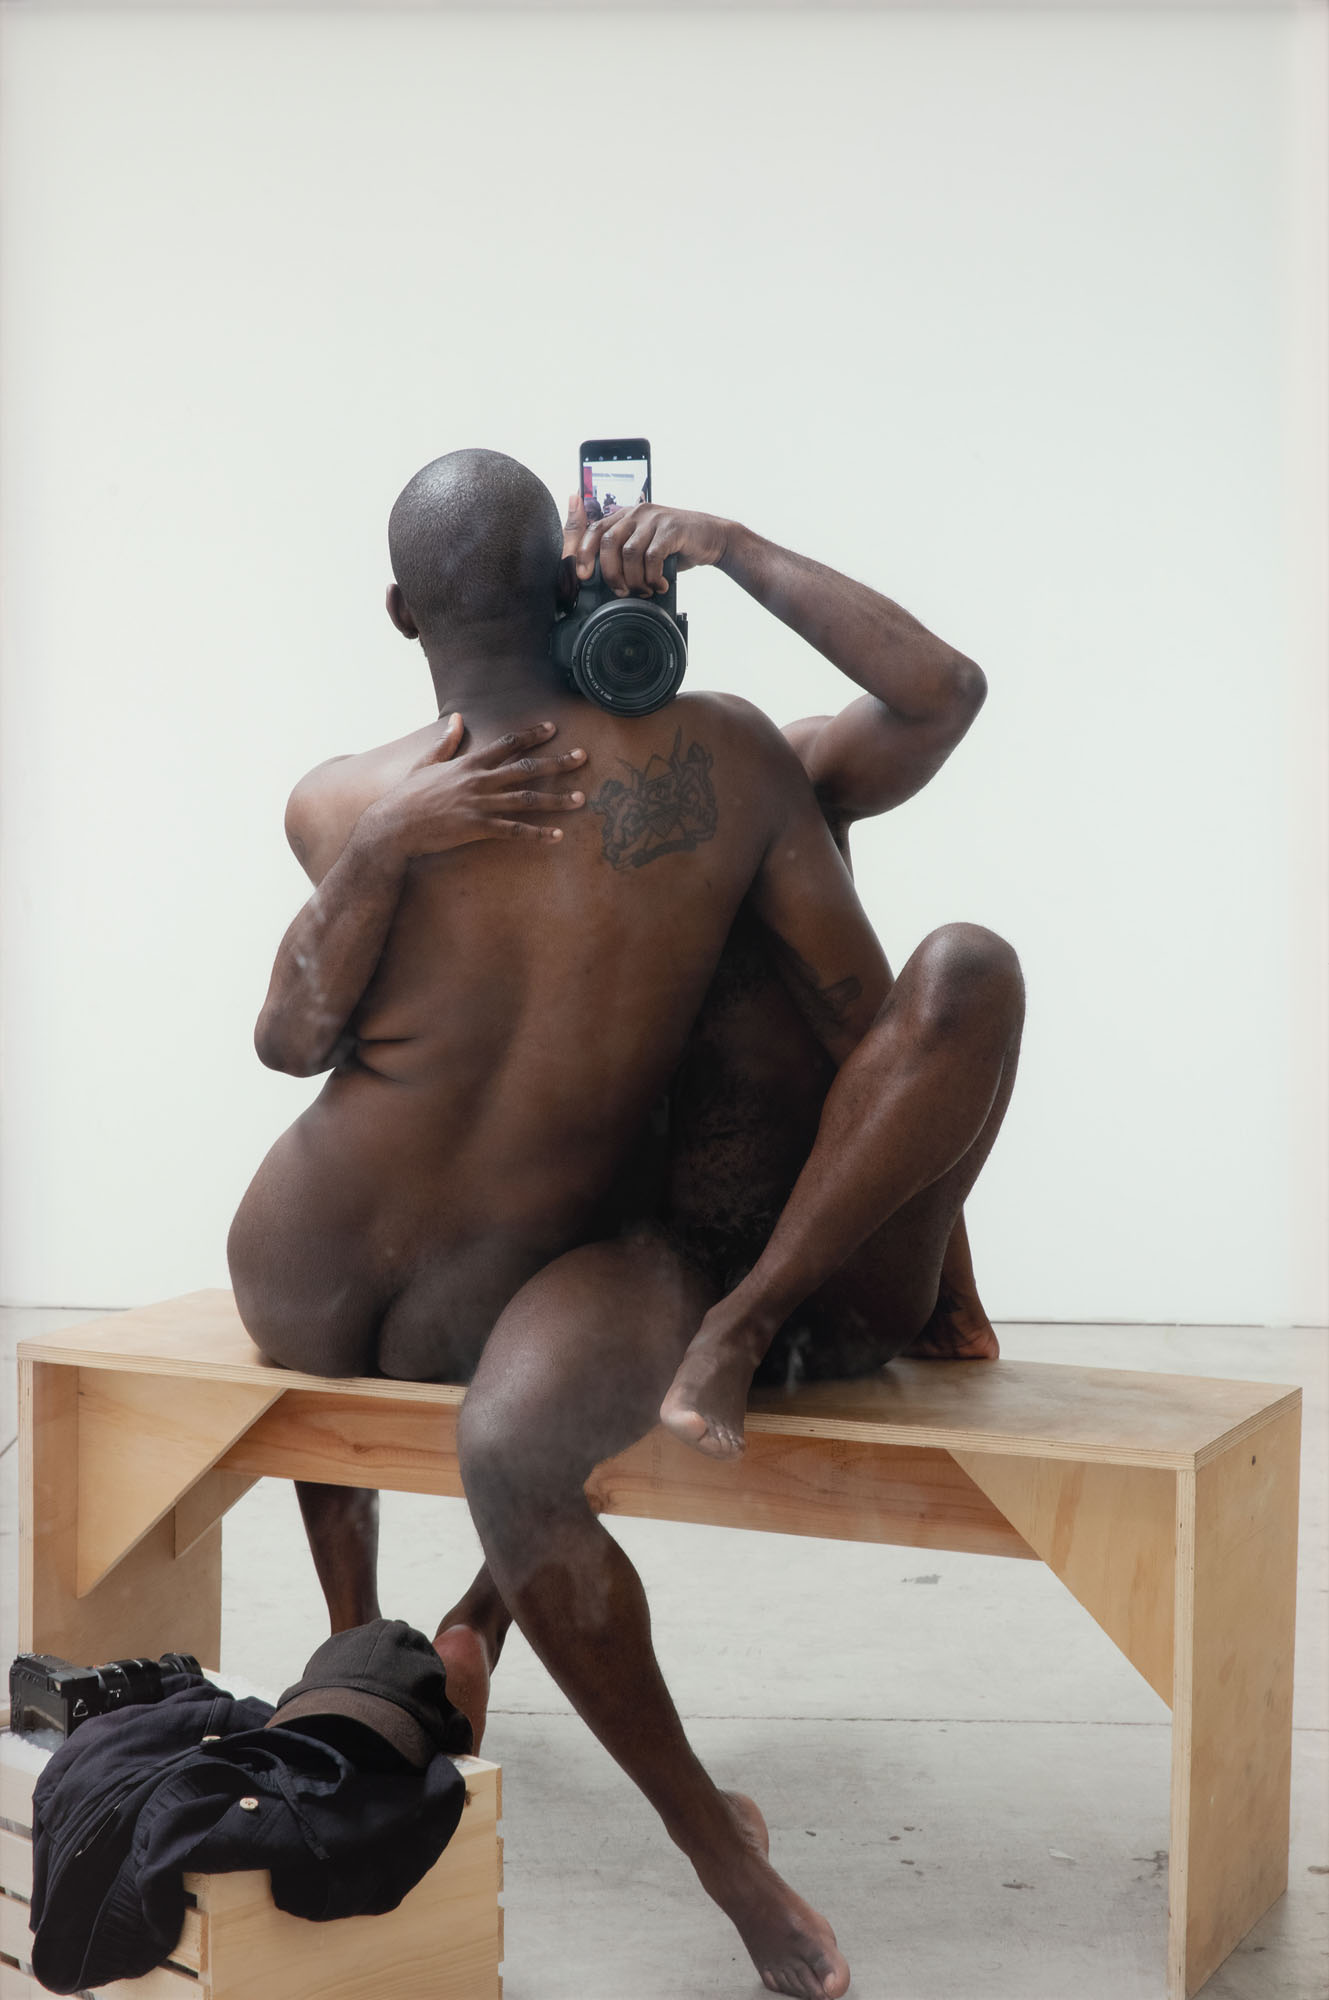 Paul Mpagi Sepuya, Figure (0x5A0918), 2019; San Francisco Museum of Modern Art, Accessions Committee Fund purchase, by exchange, through a gift of Michael D. Abrams; © Paul Mpagi Sepuya; photo: Katherine Du Tiel